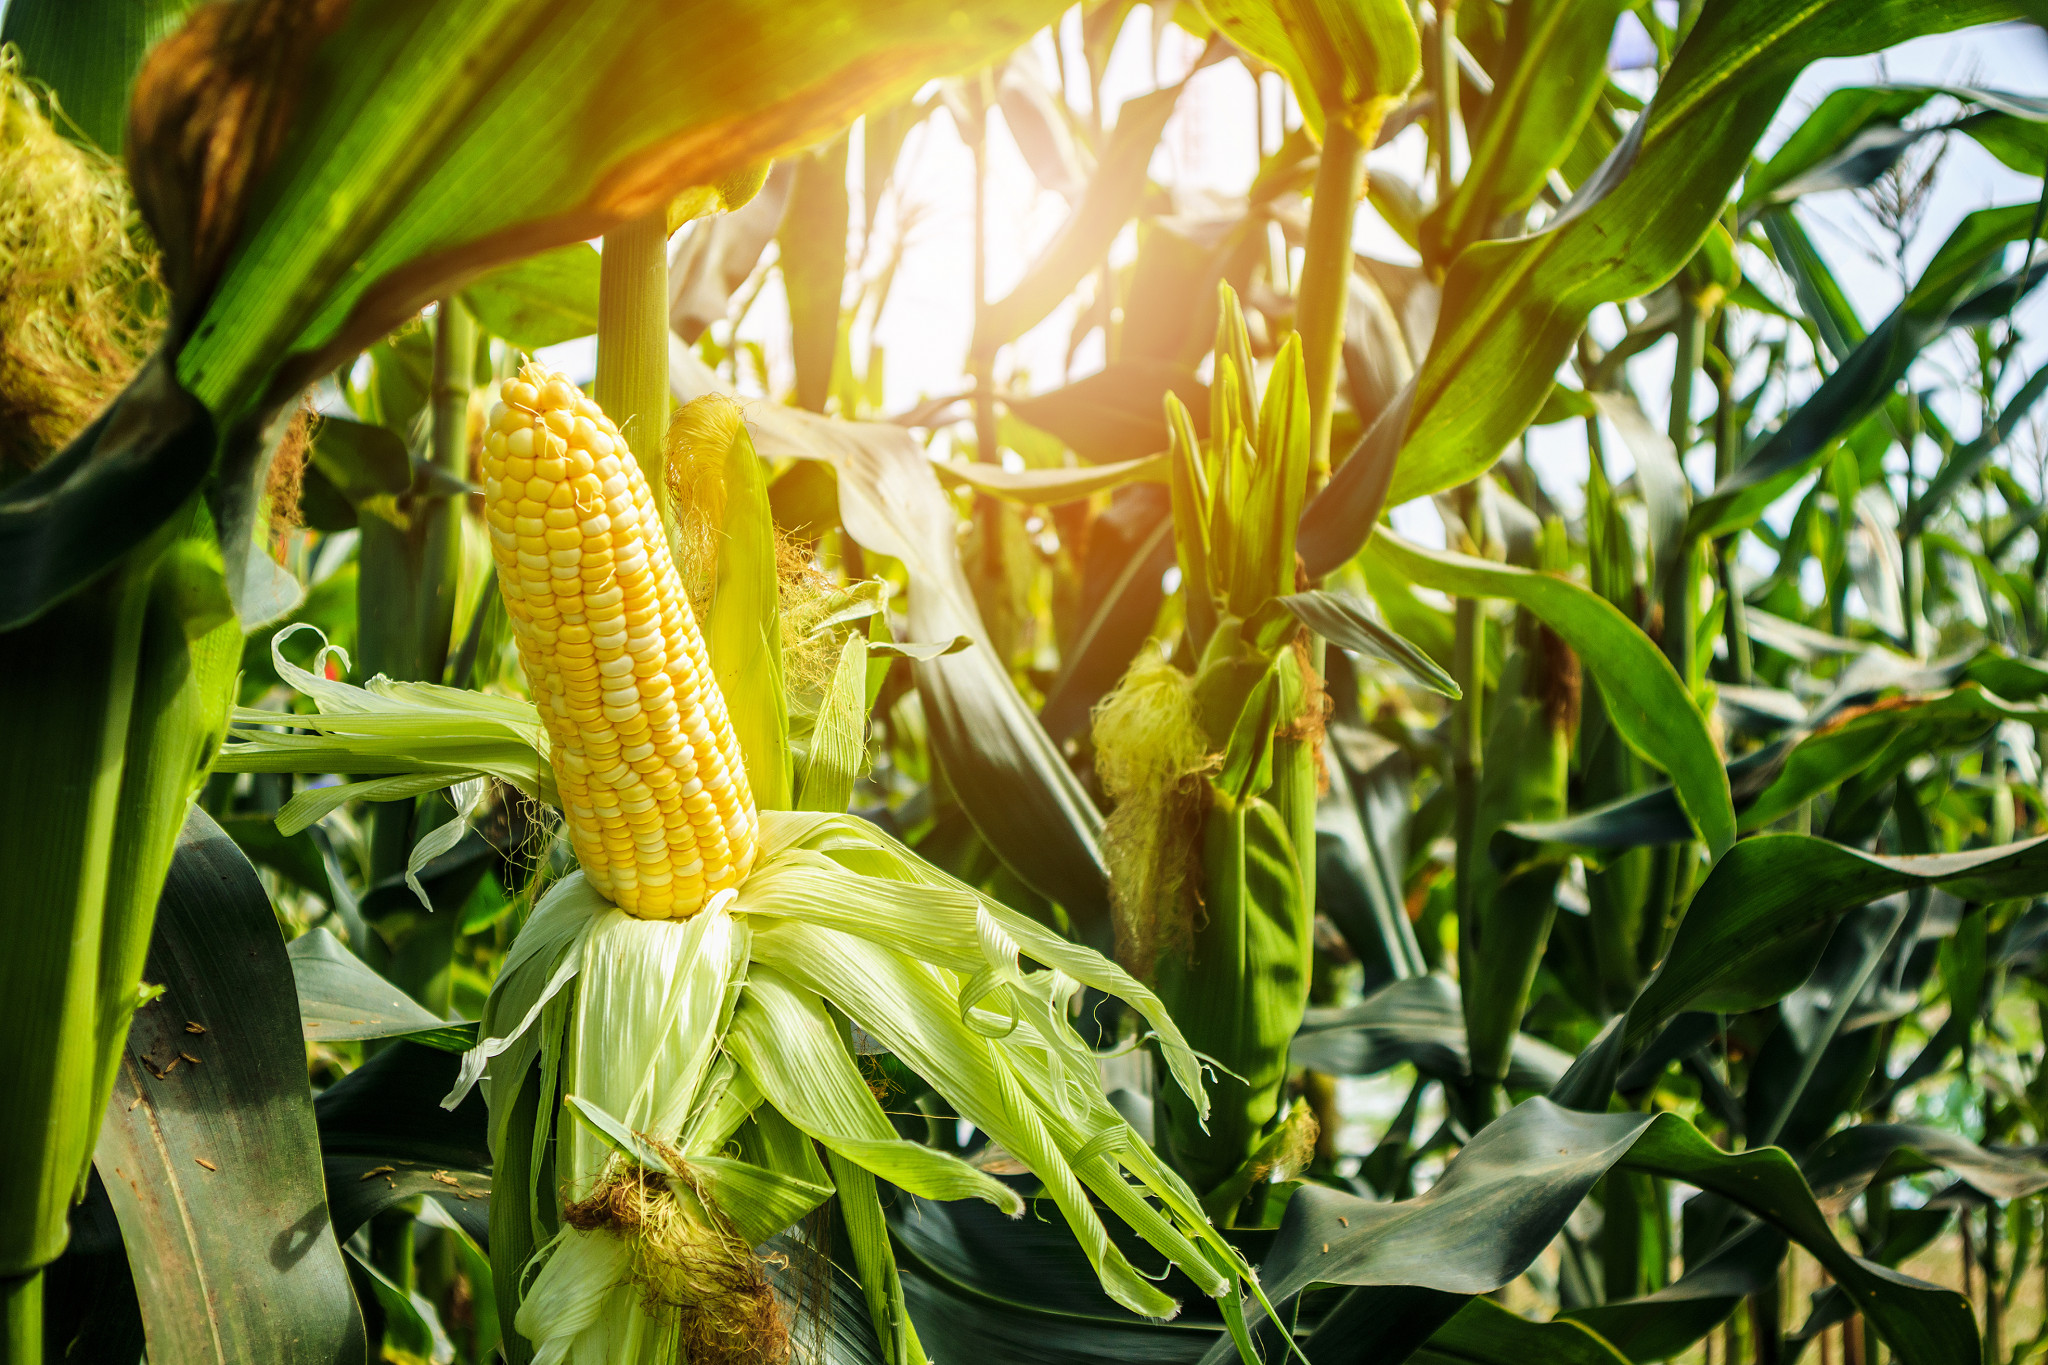 Hybrid sweetcorn makes this plant much more versatile